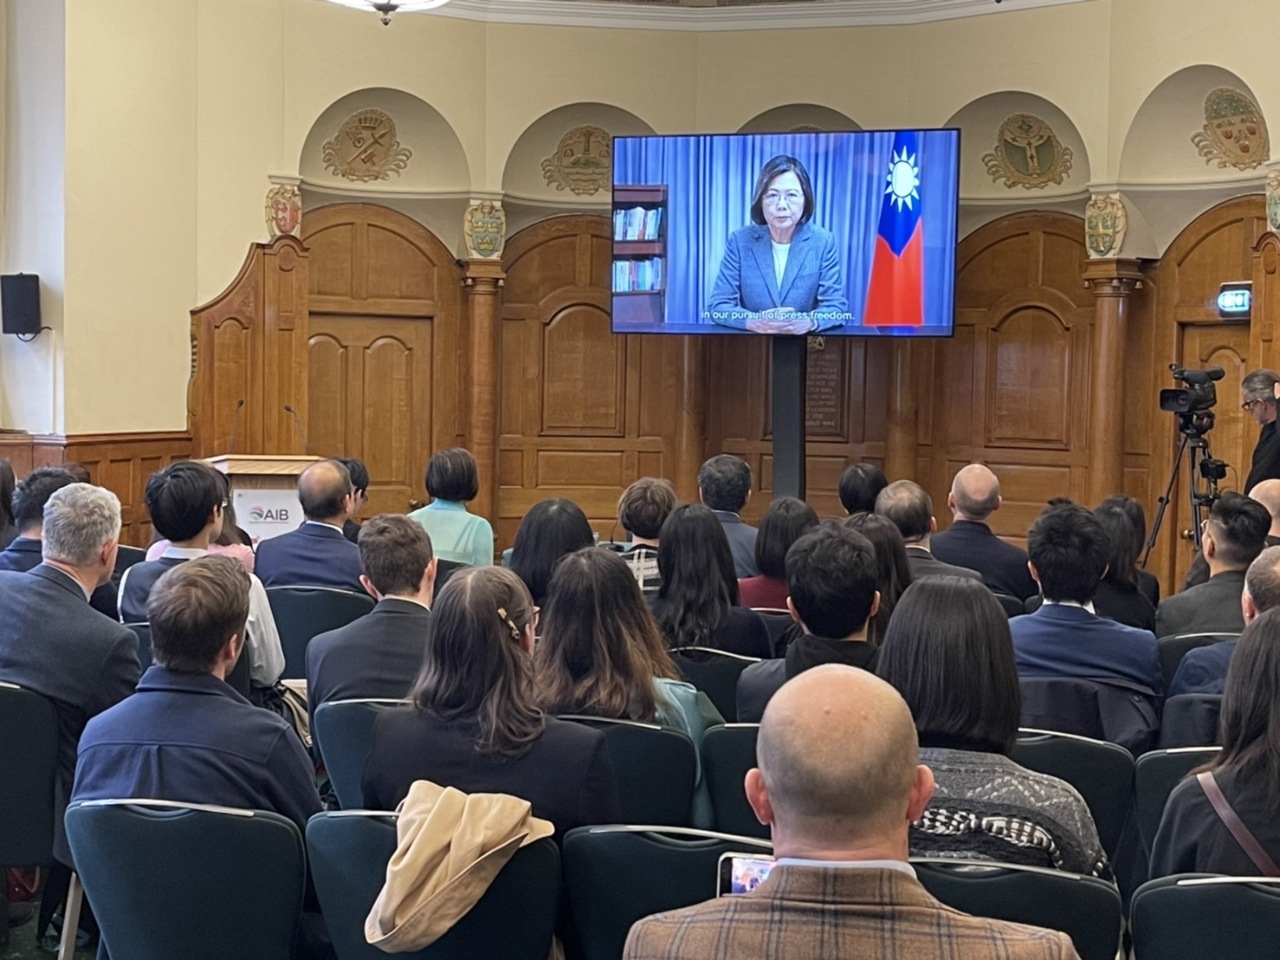 President speaks on media freedom at the 2022 Taiwan Forum in London